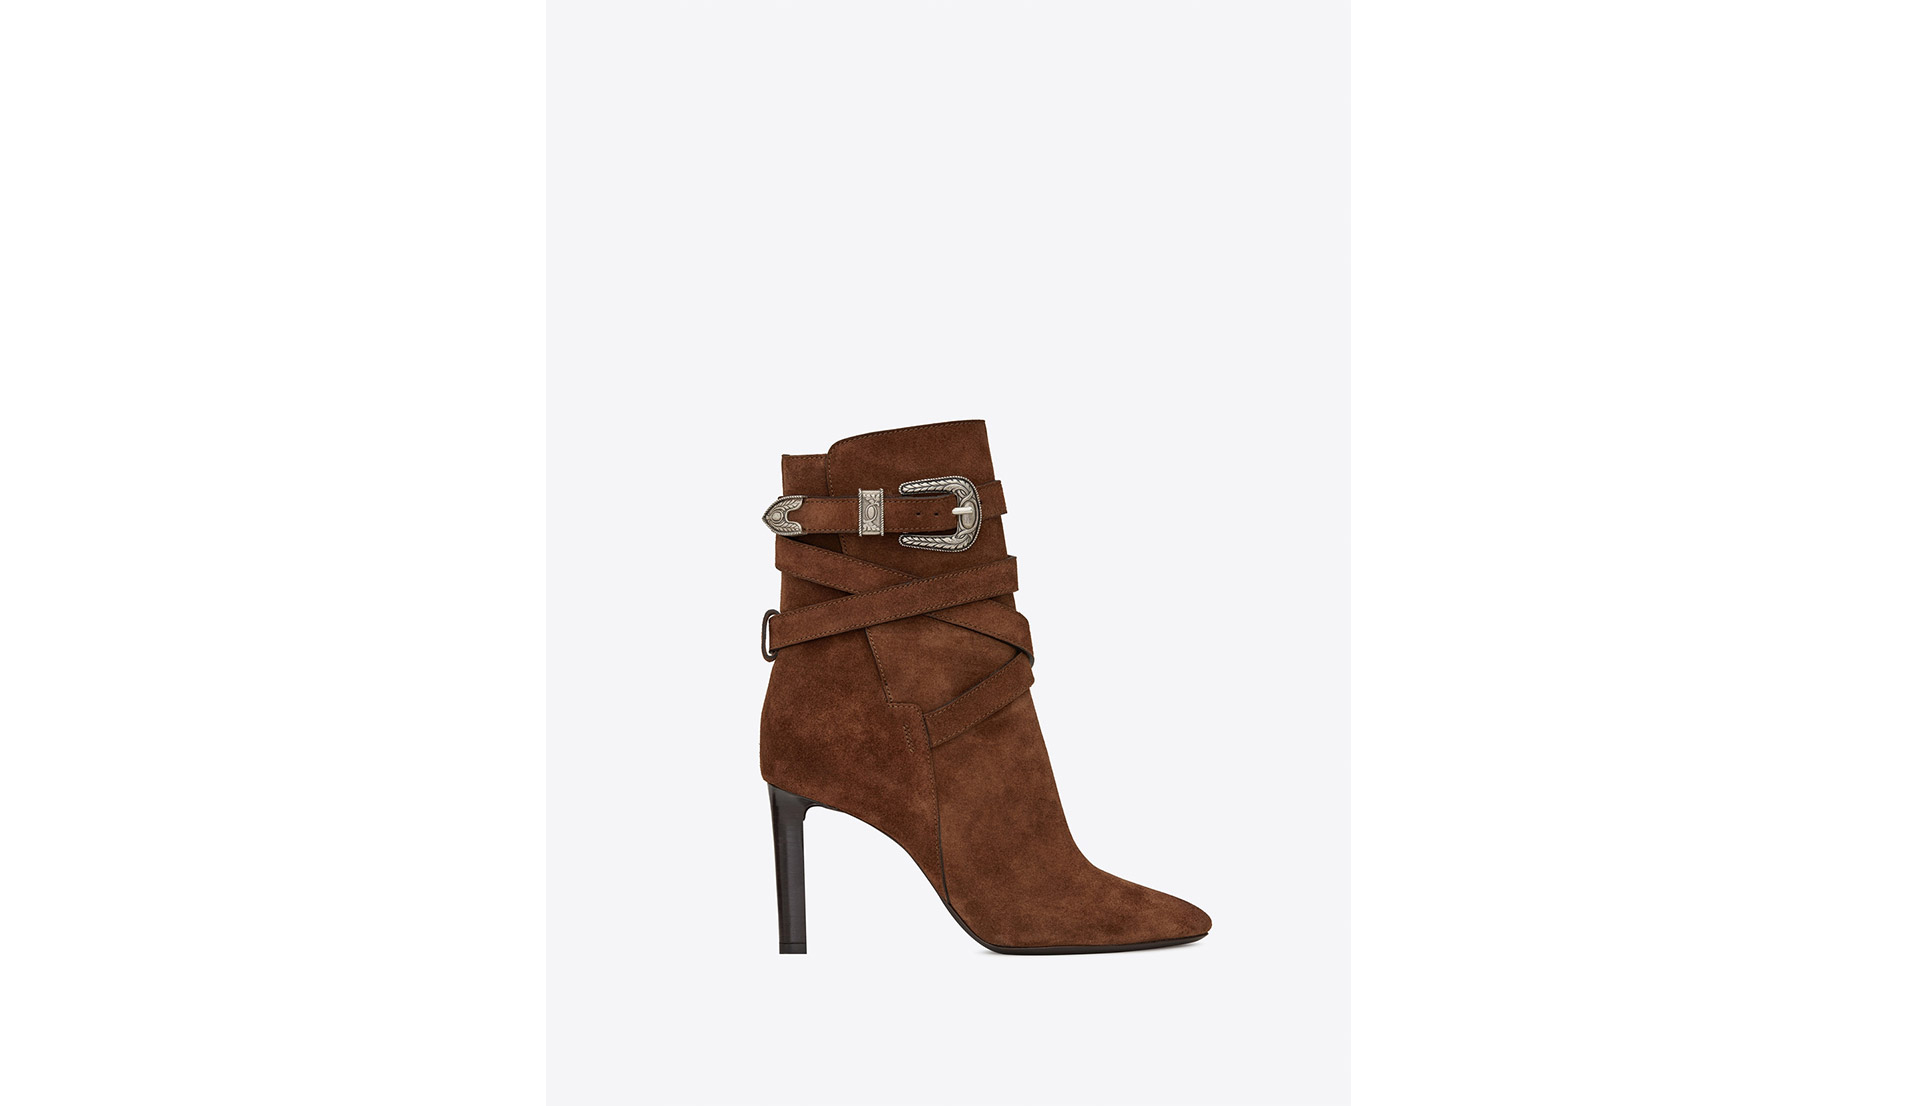 Saint Laurent Mica Western Ankle Boots in Suede